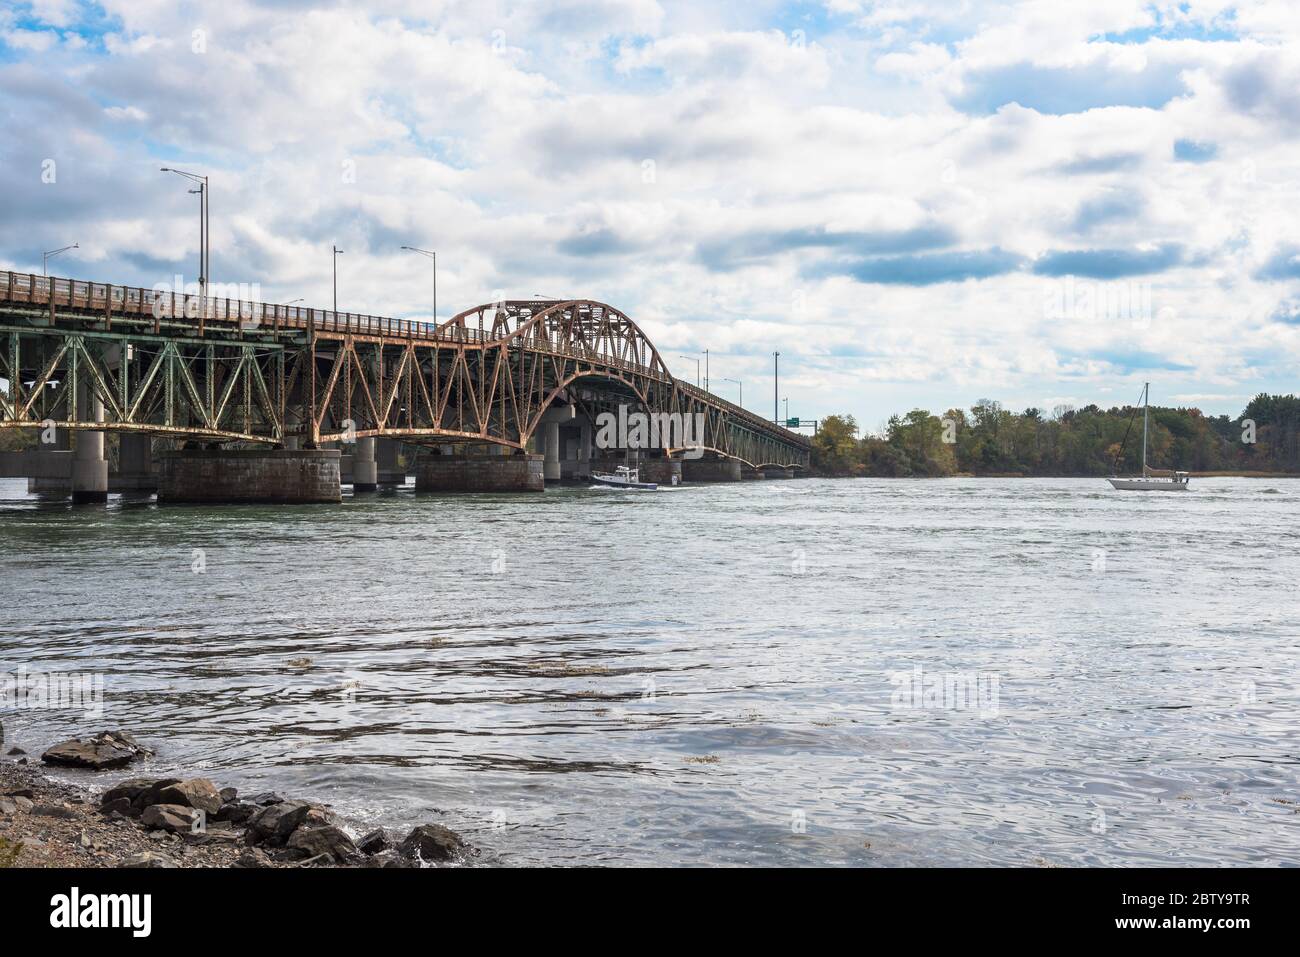 Boats sailing up a mighty river passing an old rusty steel road bridge on a cloudy autumn day Stock Photo